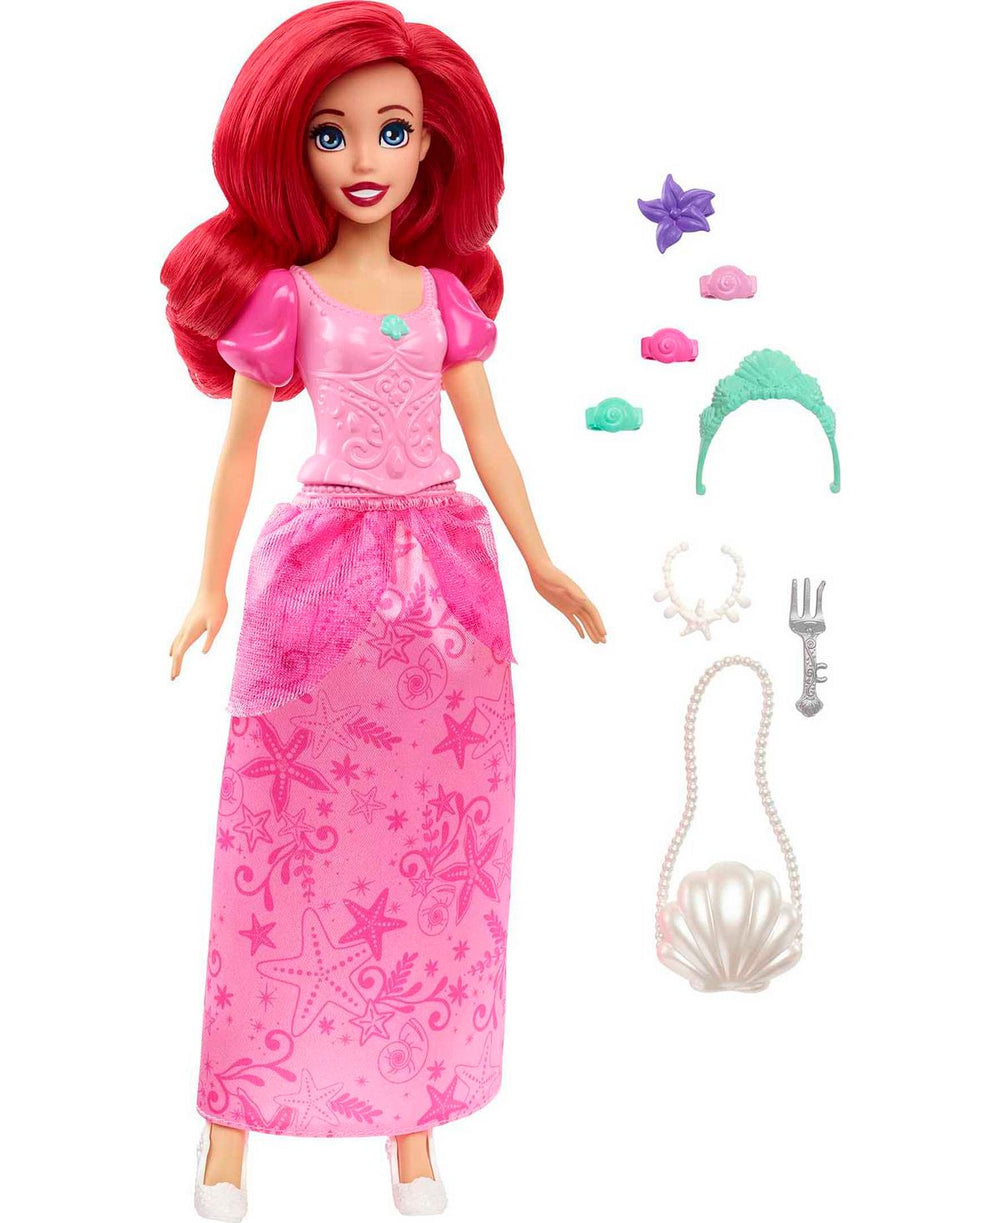 Disney Princess - The Little Mermaid Getting Ready Ariel Doll with Accessories